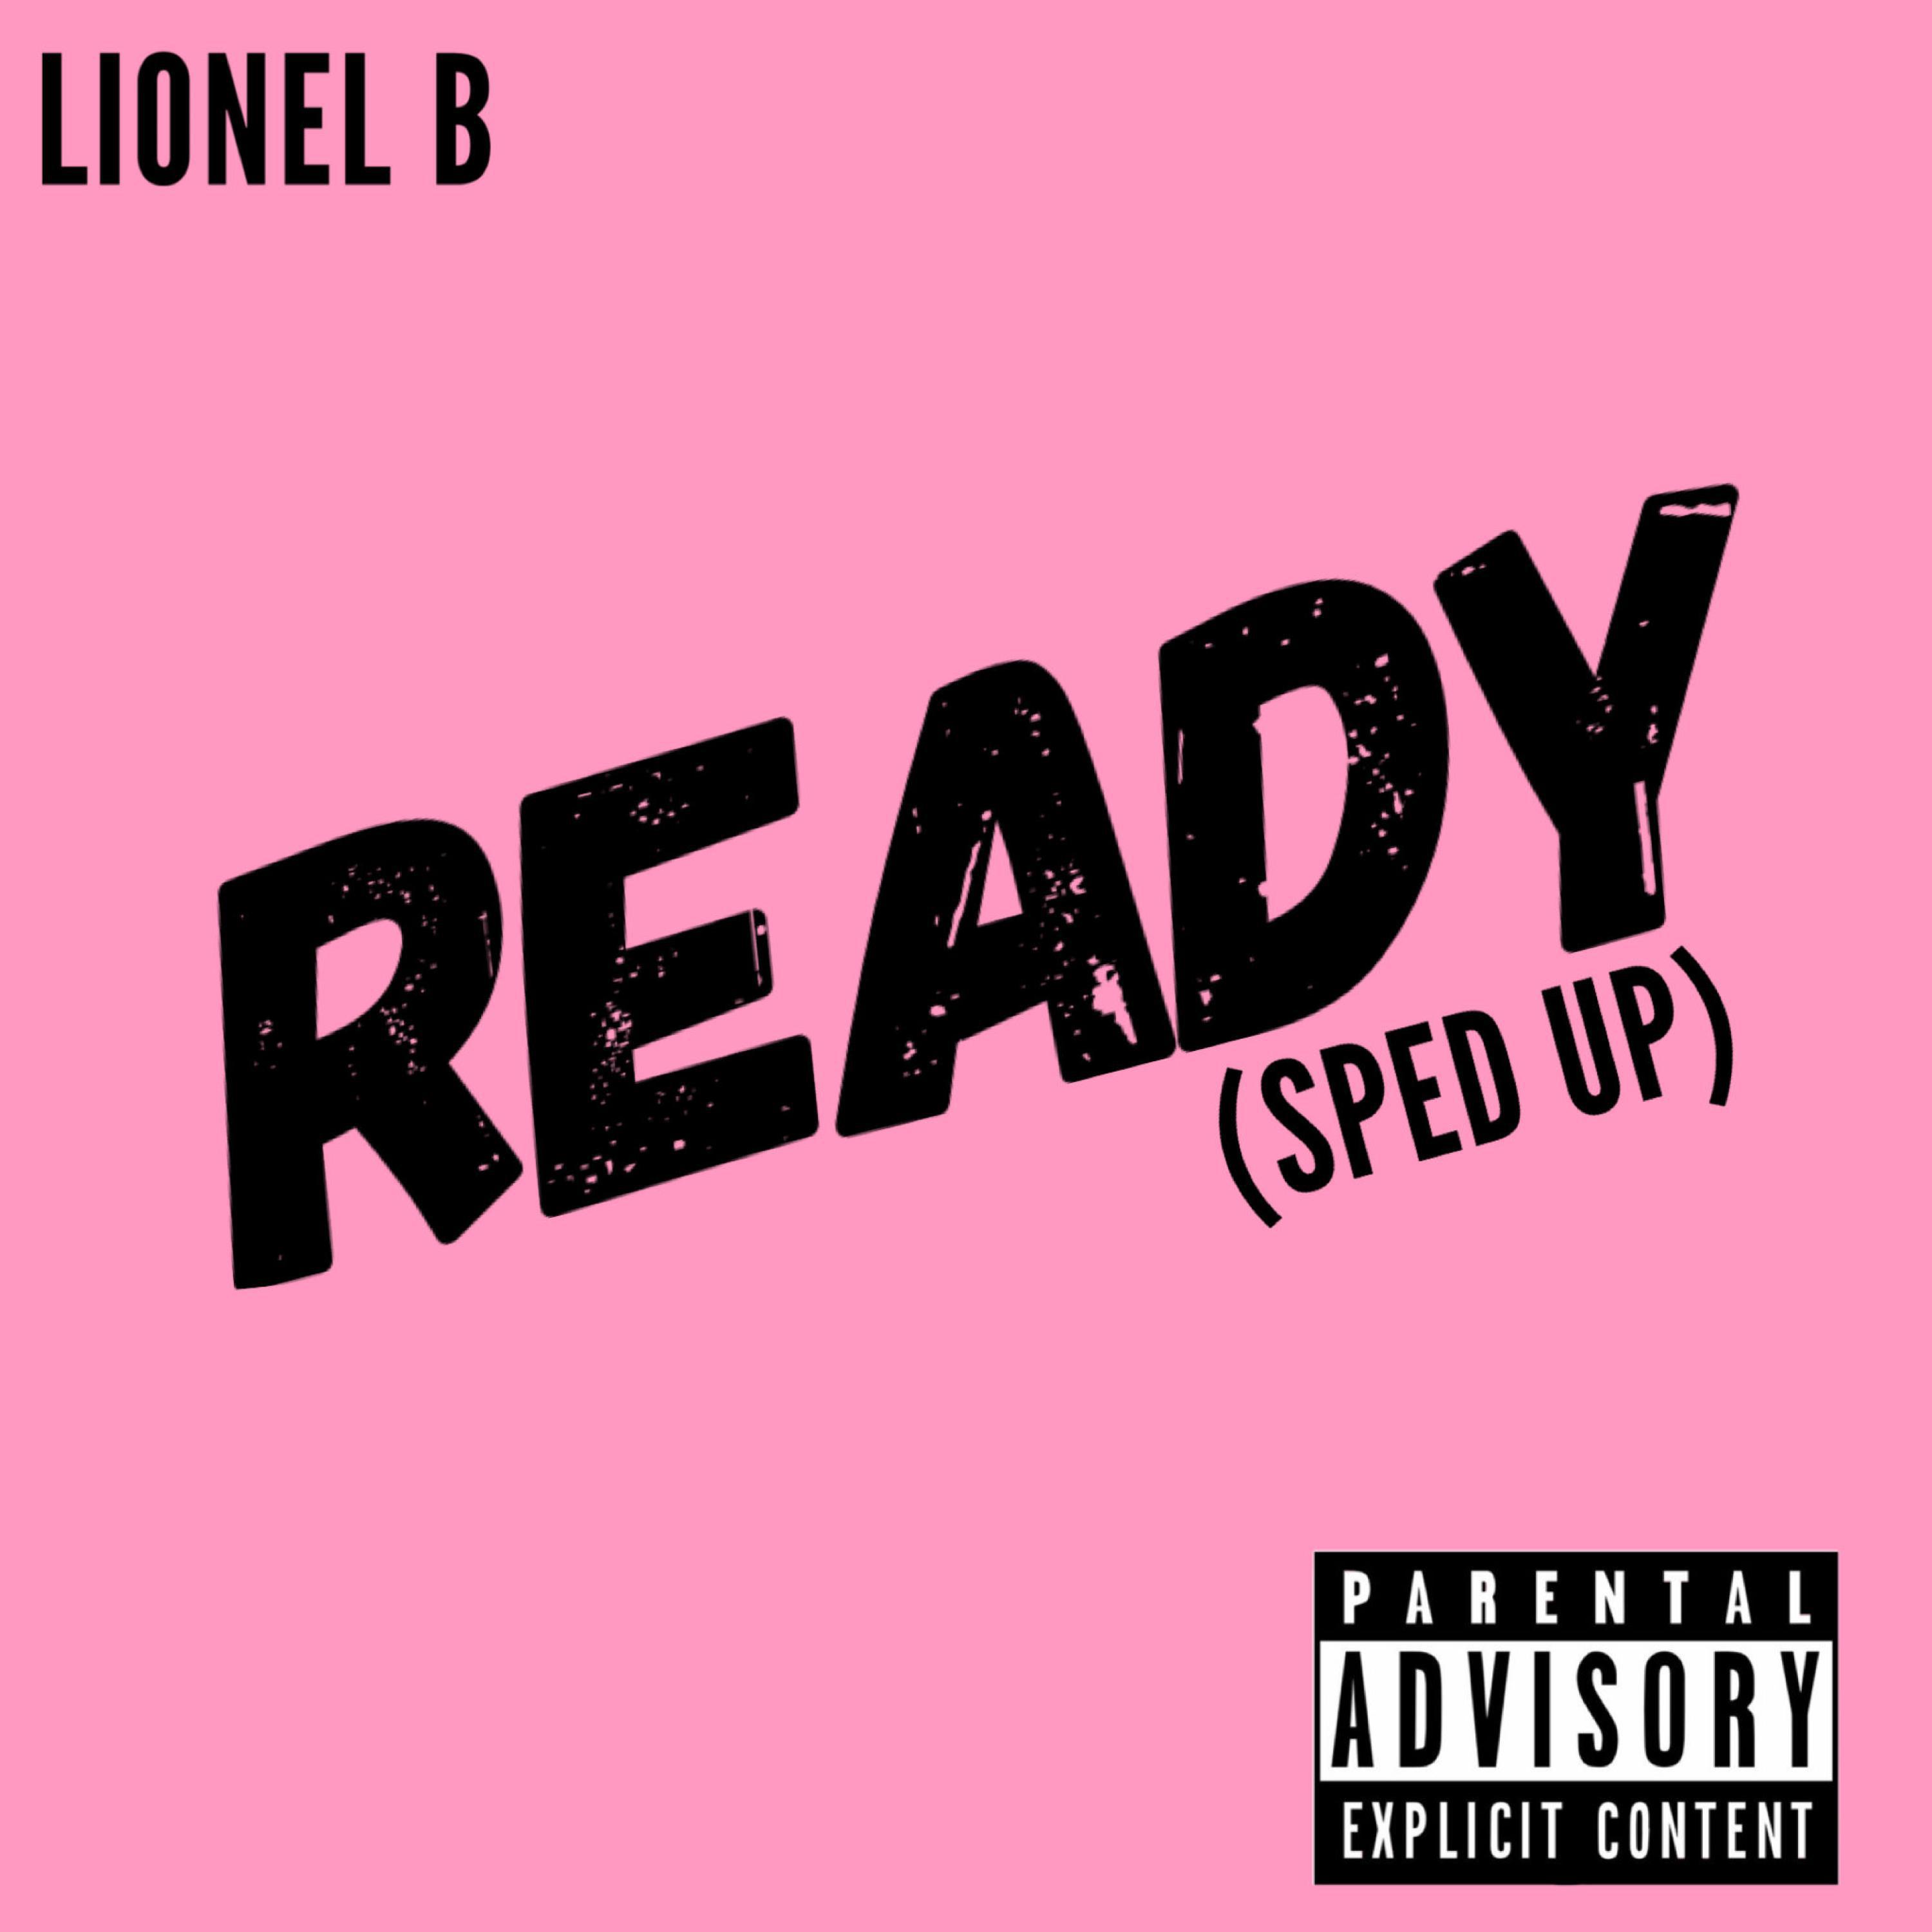 Lionel B - I'm Ready (Sped Up)